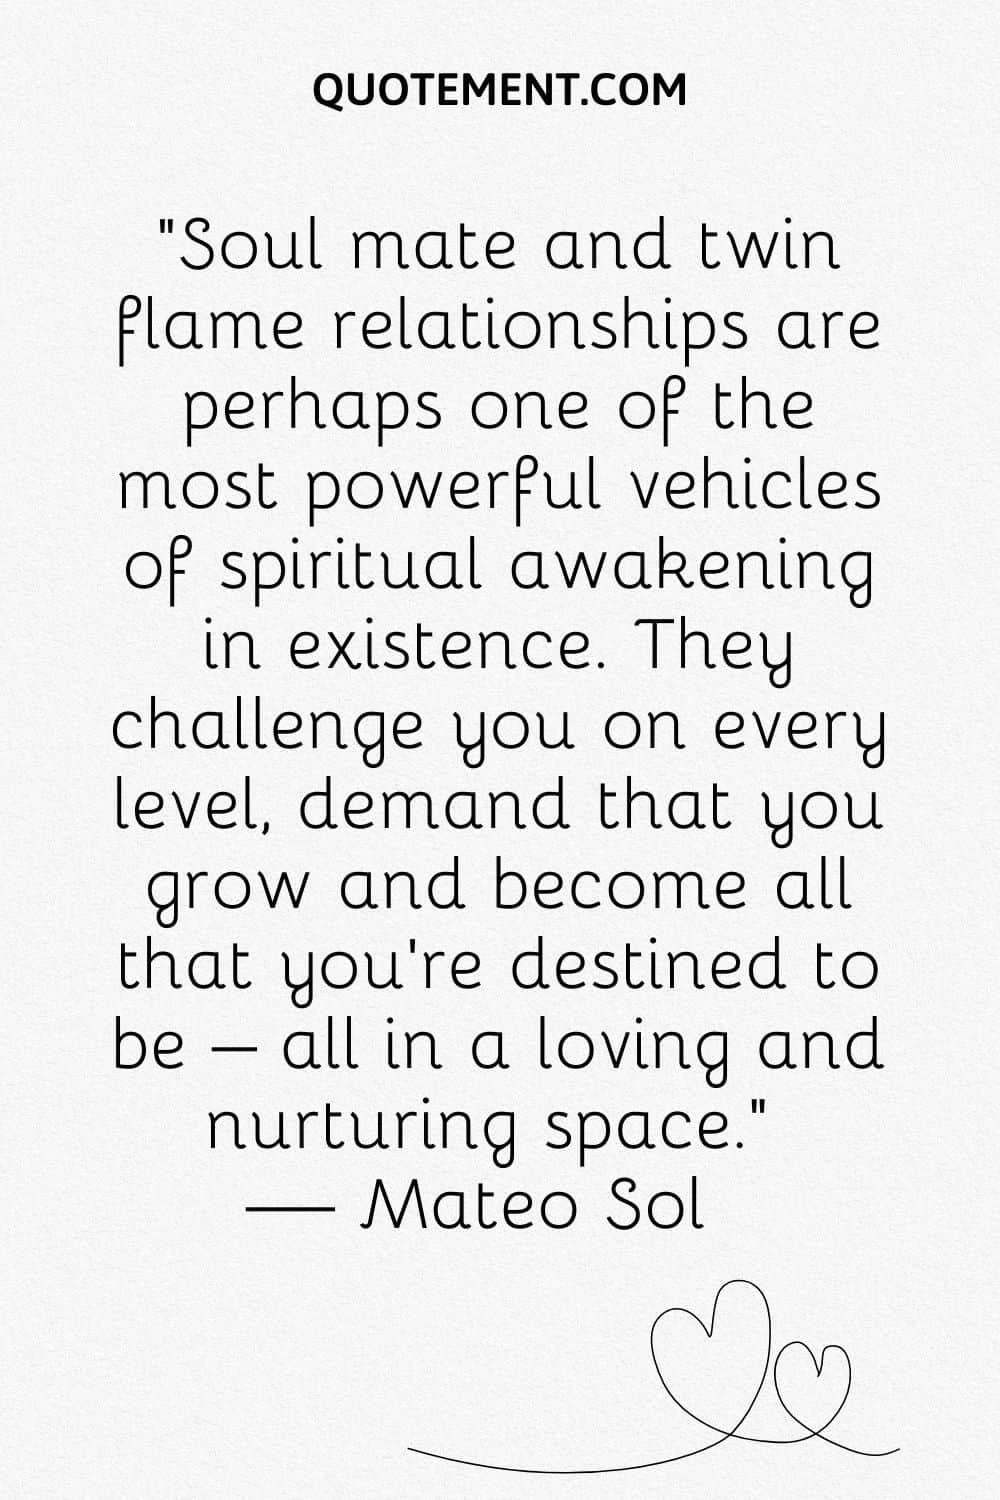 Soul mate and twin flame relationships are perhaps one of the most powerful vehicles of spiritual awakening in existence